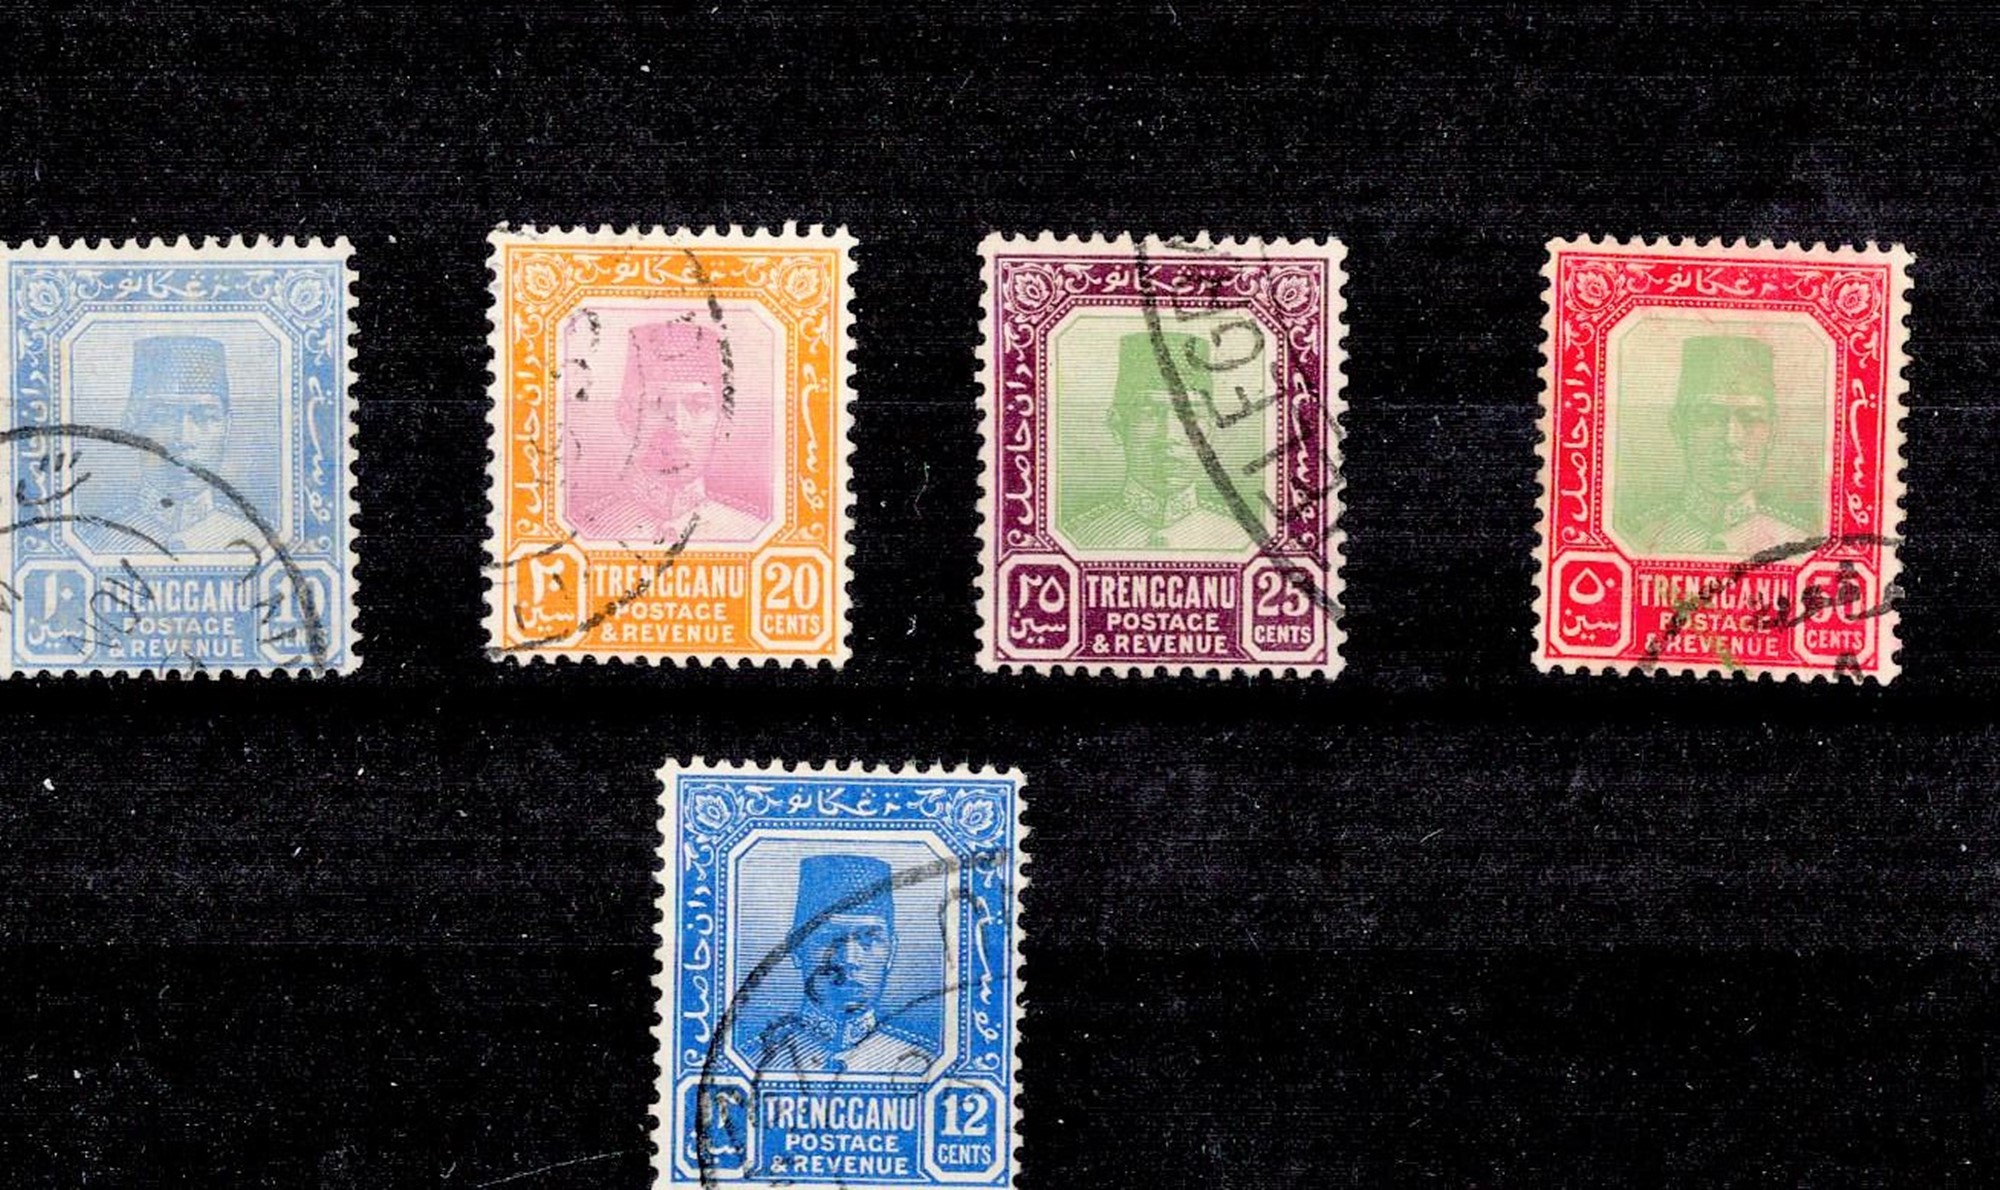 Terengganu Pre 1936 5 Stamps. Good condition. We combine postage on multiple winning lots and can - Image 3 of 3